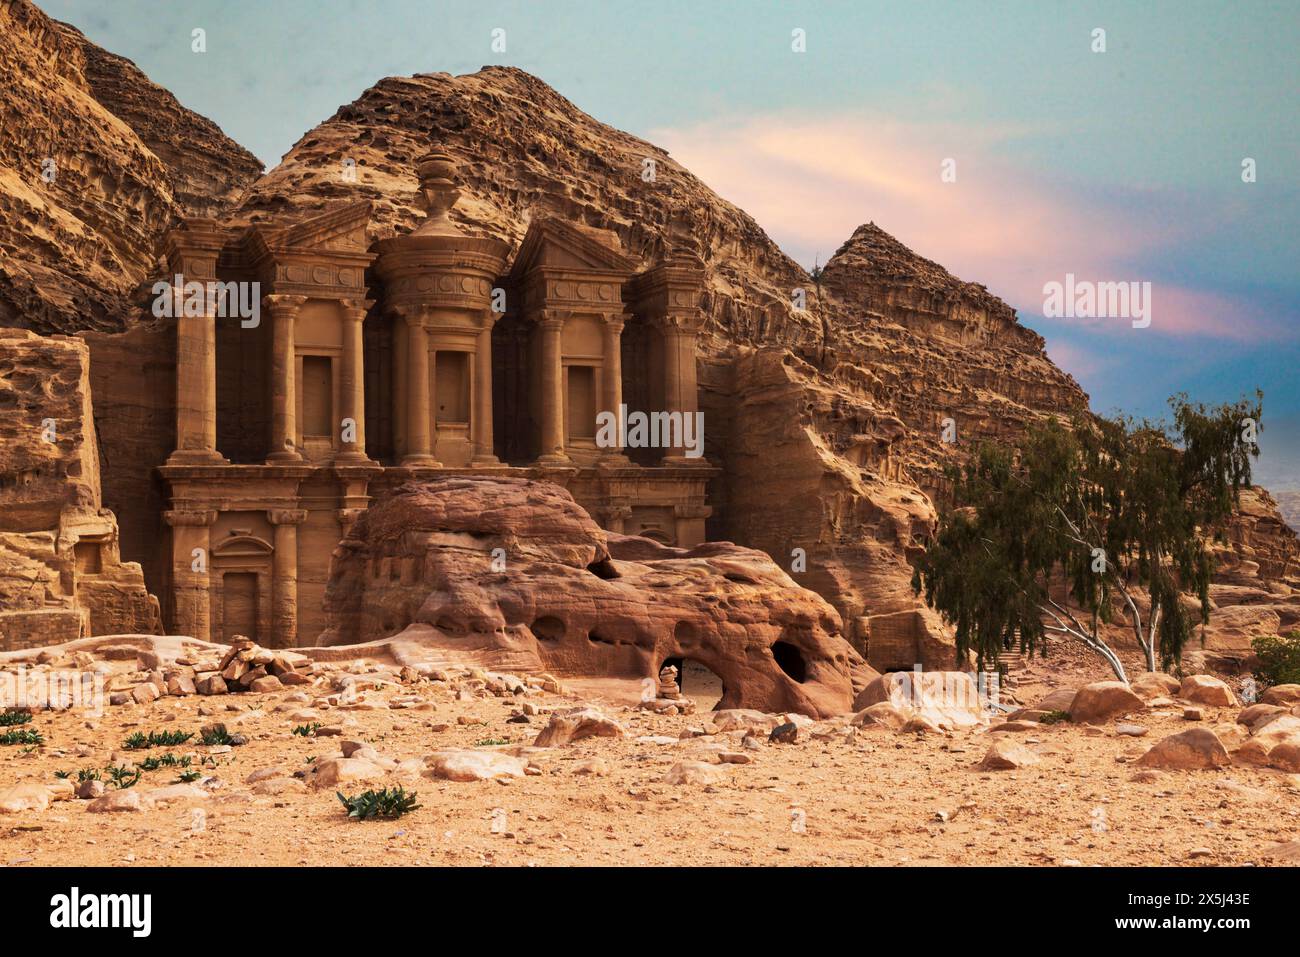 Jordan, Petra. Unesco World Heritage Site, capital of the Nabataean Kingdom founded in 3rd Century BC. The Monastery. Stock Photo